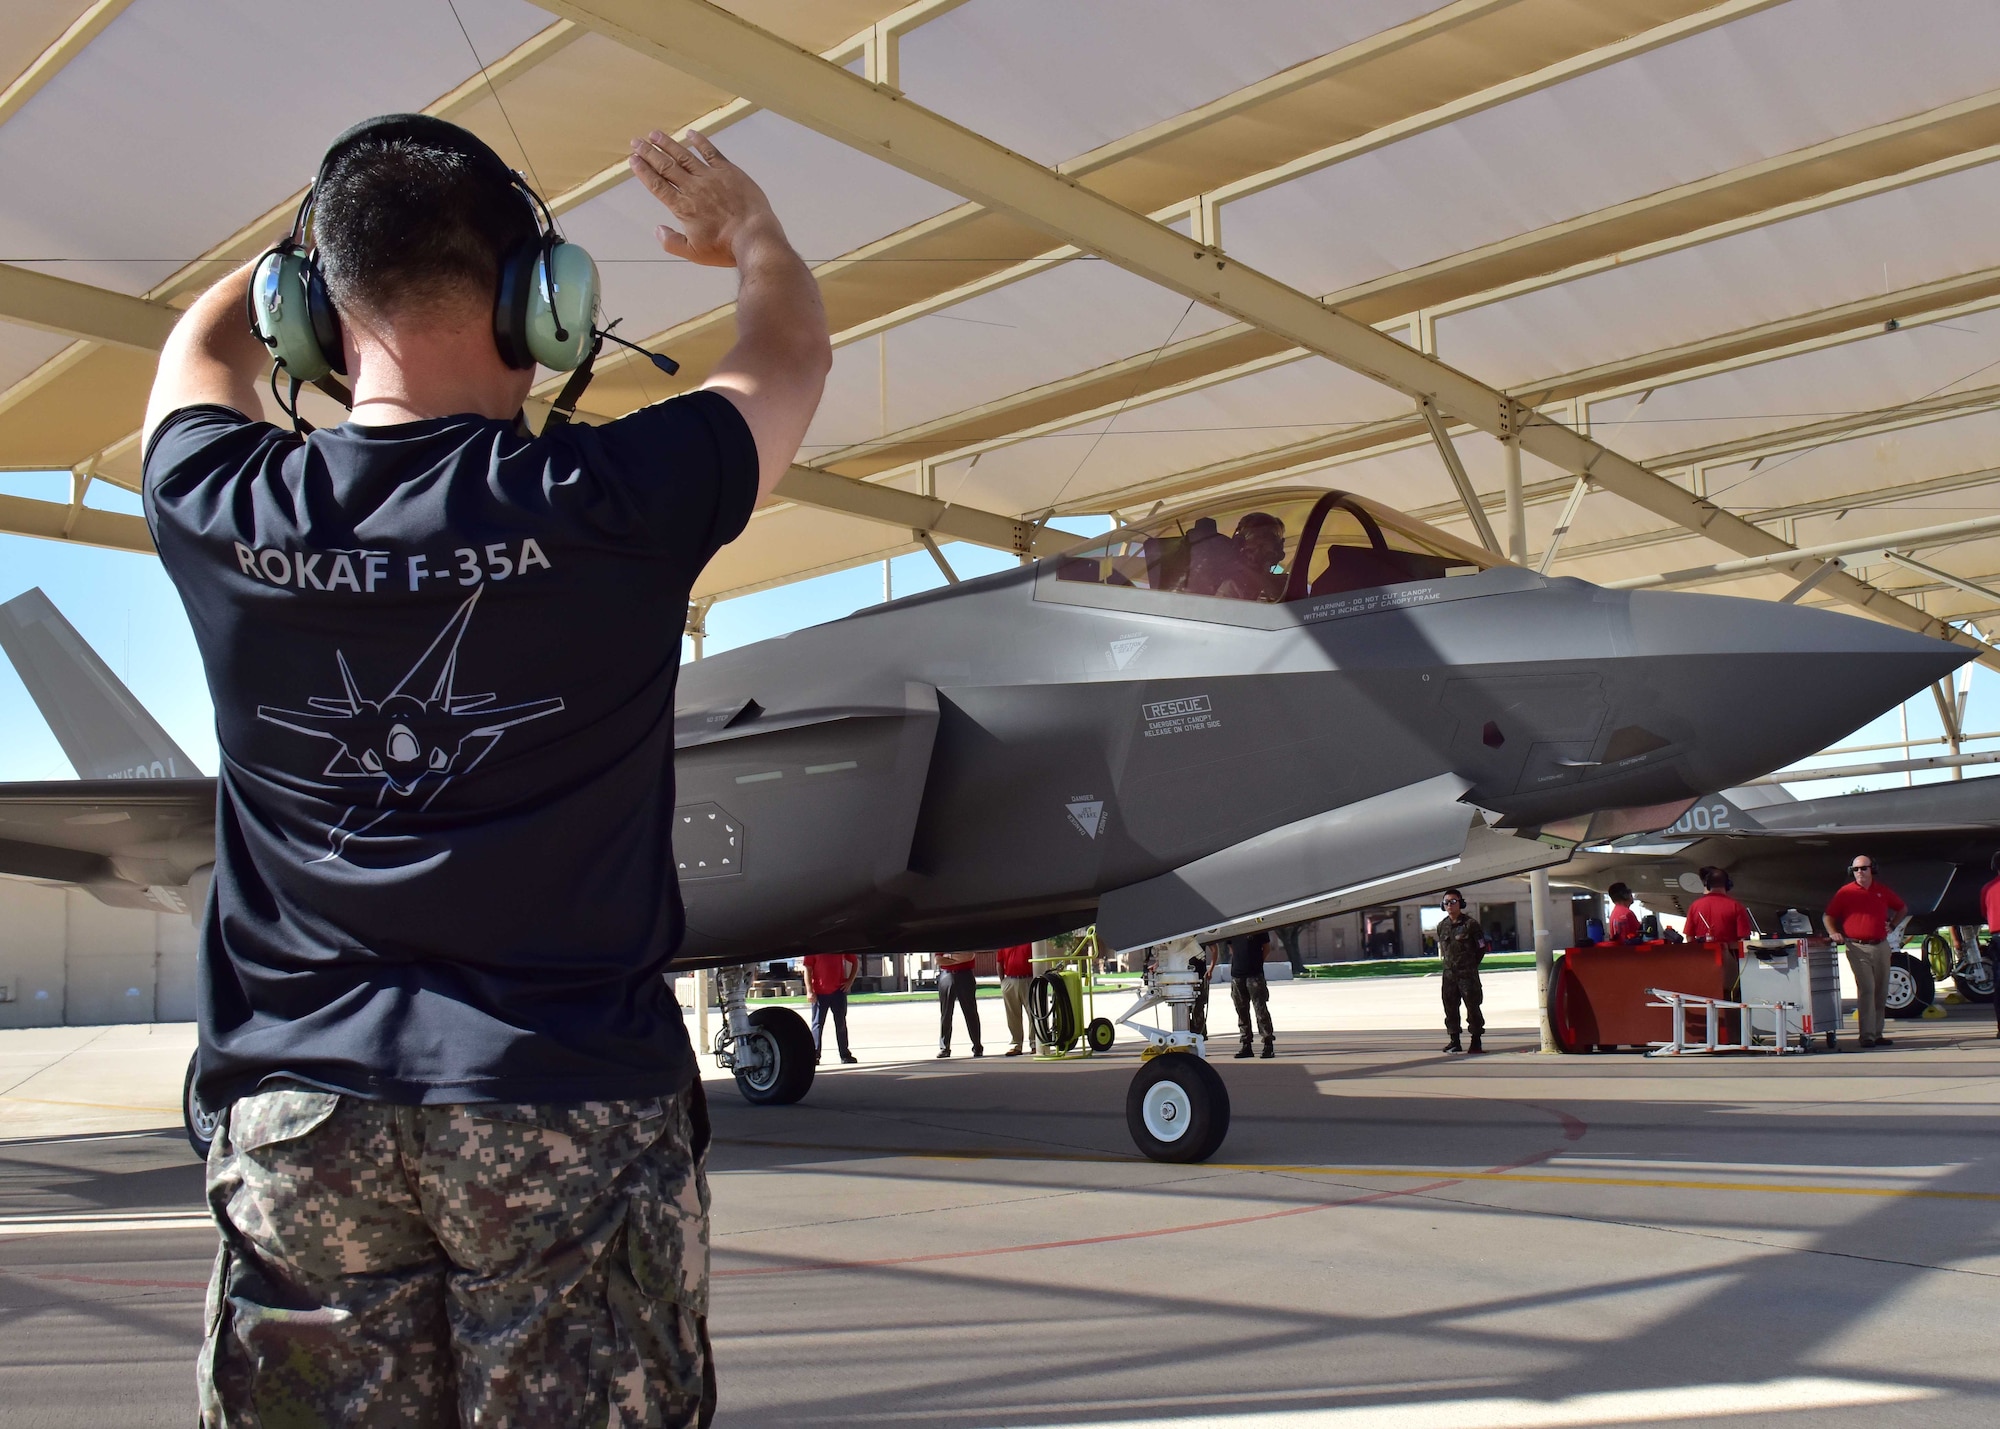 After a year of preparation and instruction through the 944th Operations Group Detachment 2, Lockheed Martin and their active duty team members at the 56th Fighter Wing, Maj. Kiyun Jung, ROKAF F-35A pilot, flew his first solo mission.